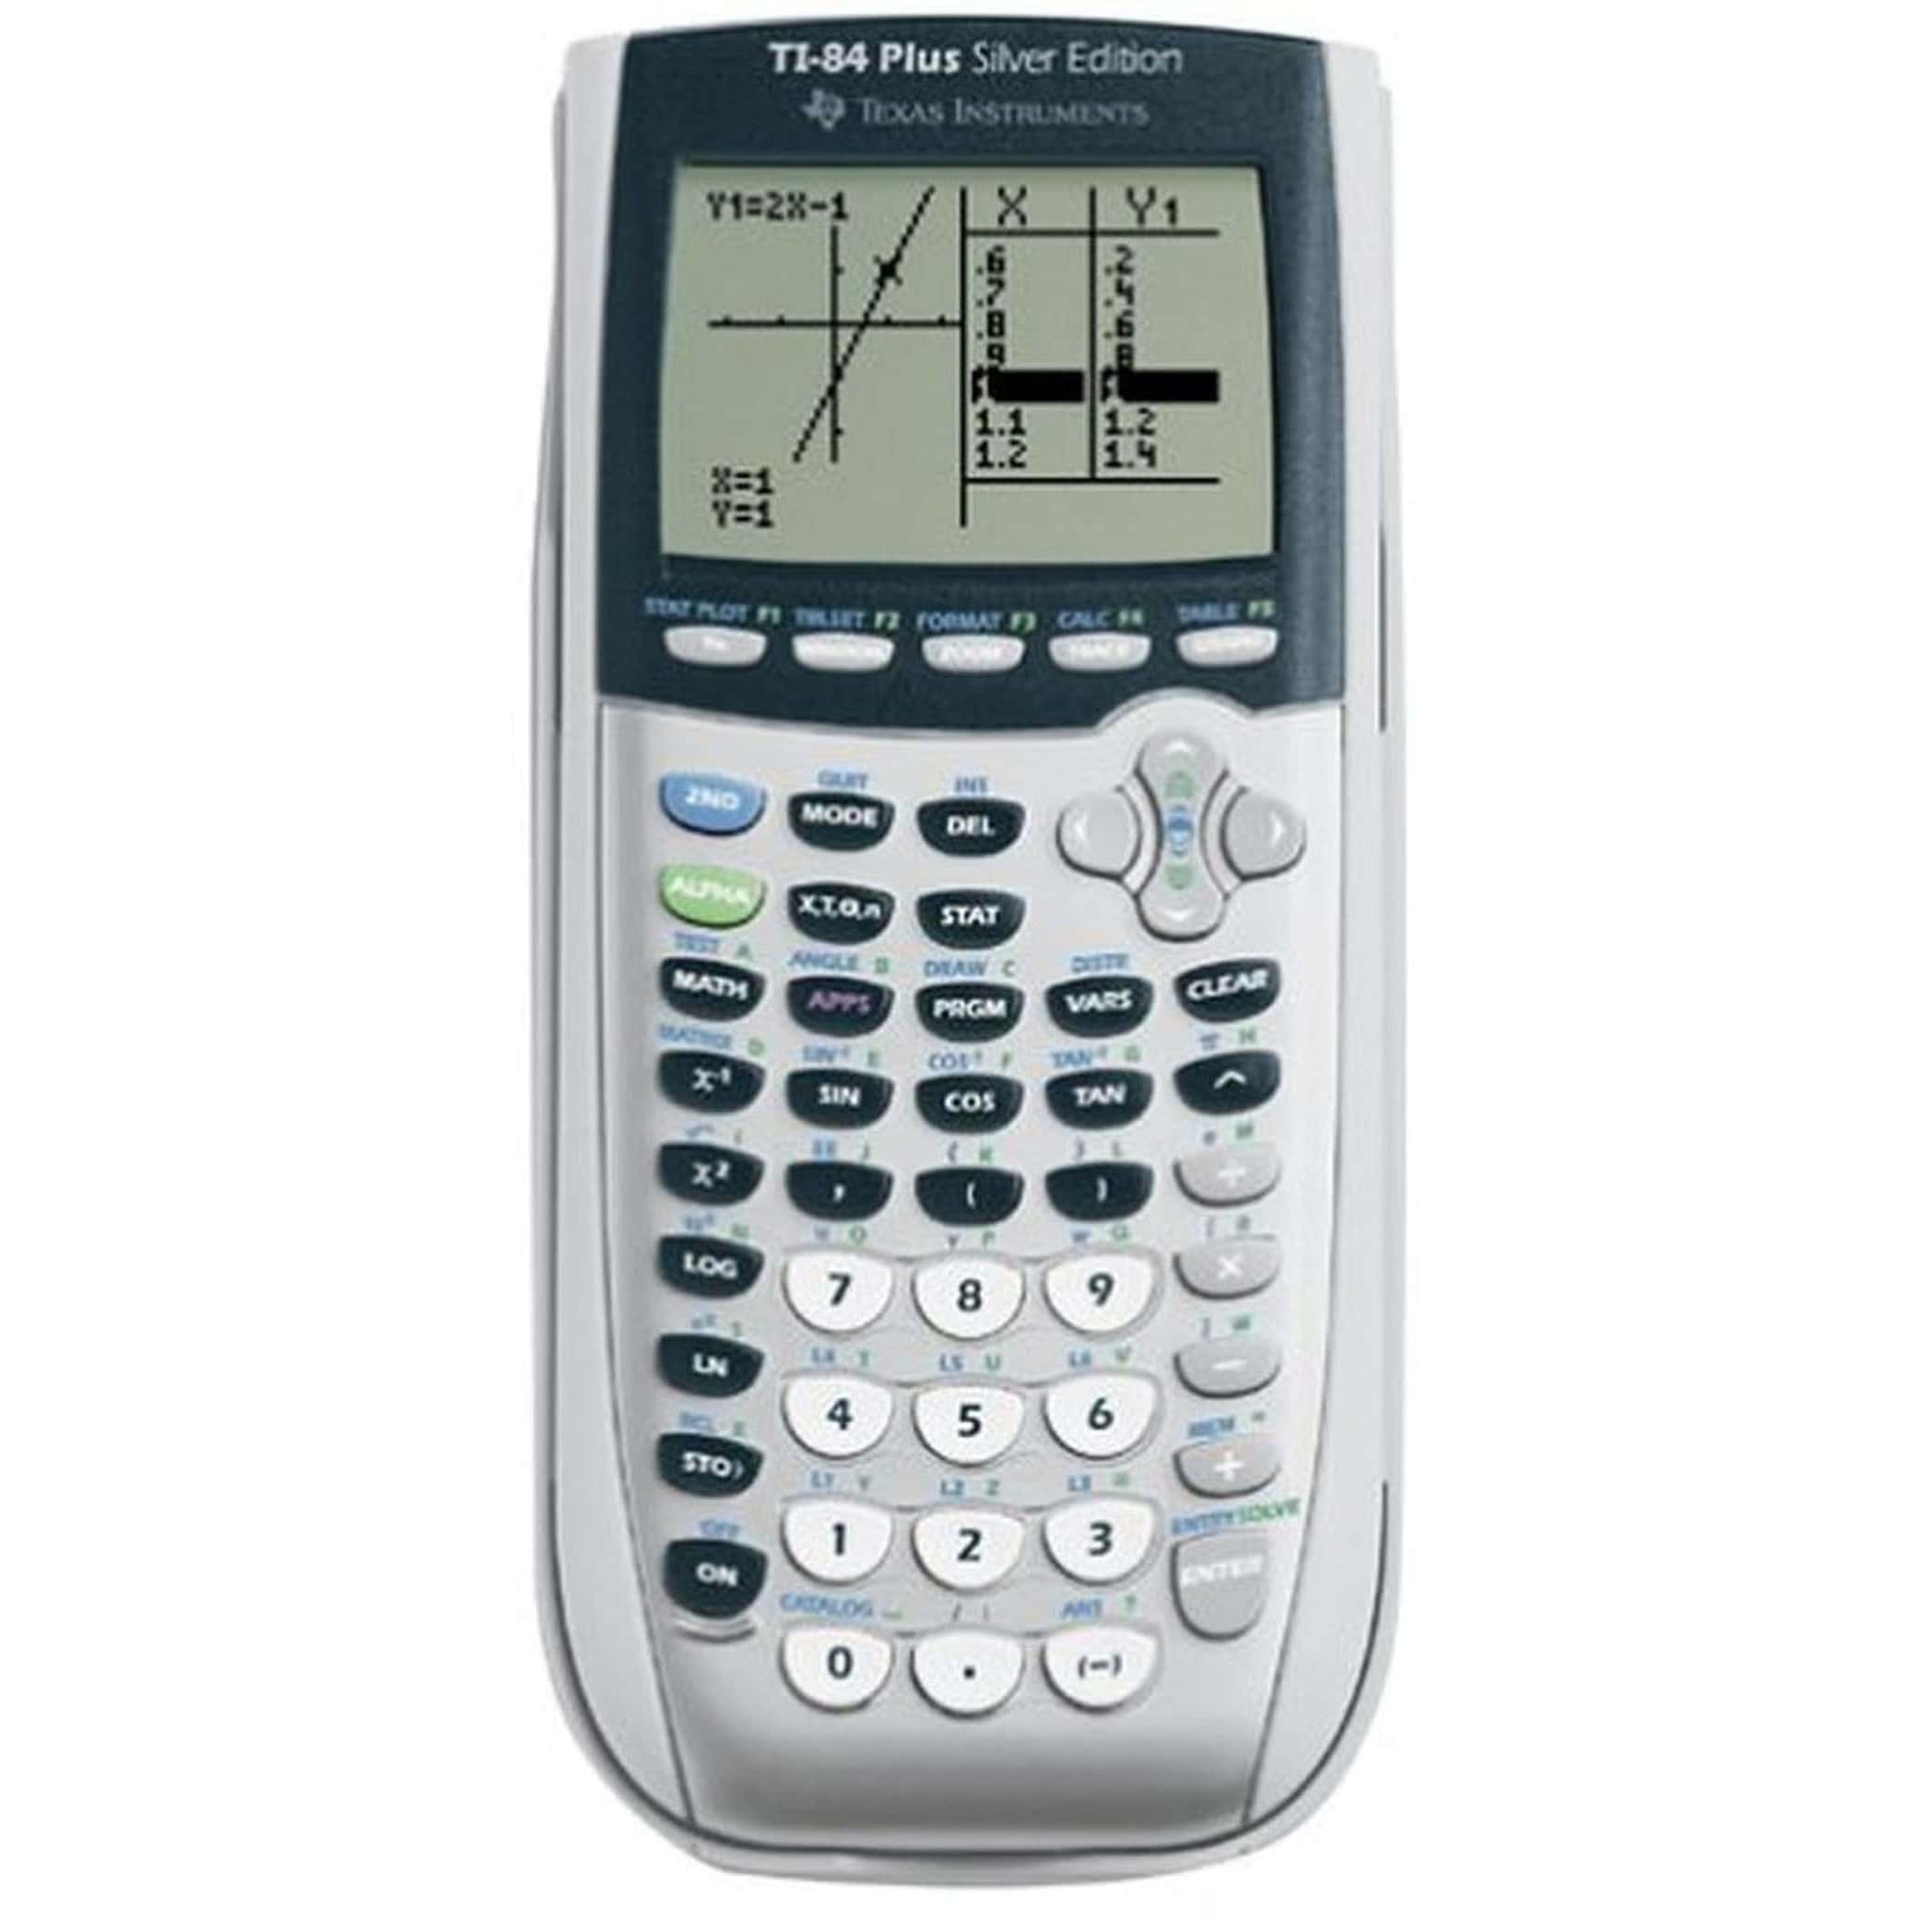 Texas Instruments Plus Silver Edition Graphing